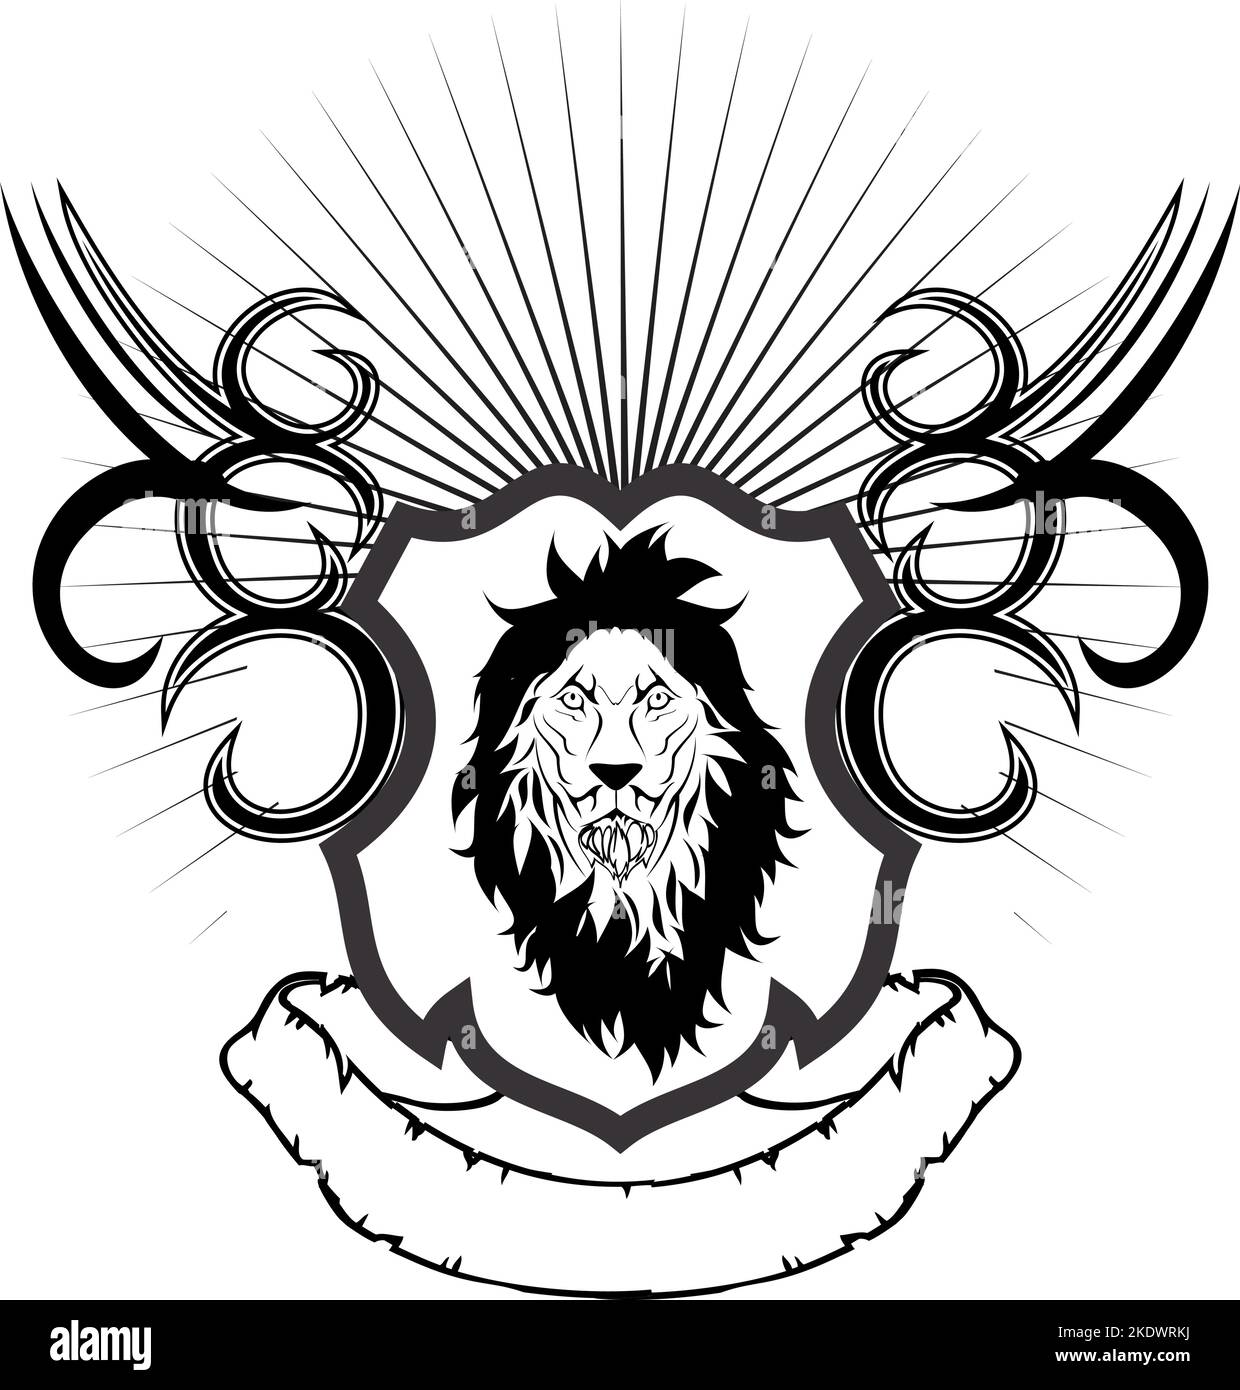 lion tribal head tattoo crest coat of arms emblem. insignia isolated vector illustartion Stock Vector